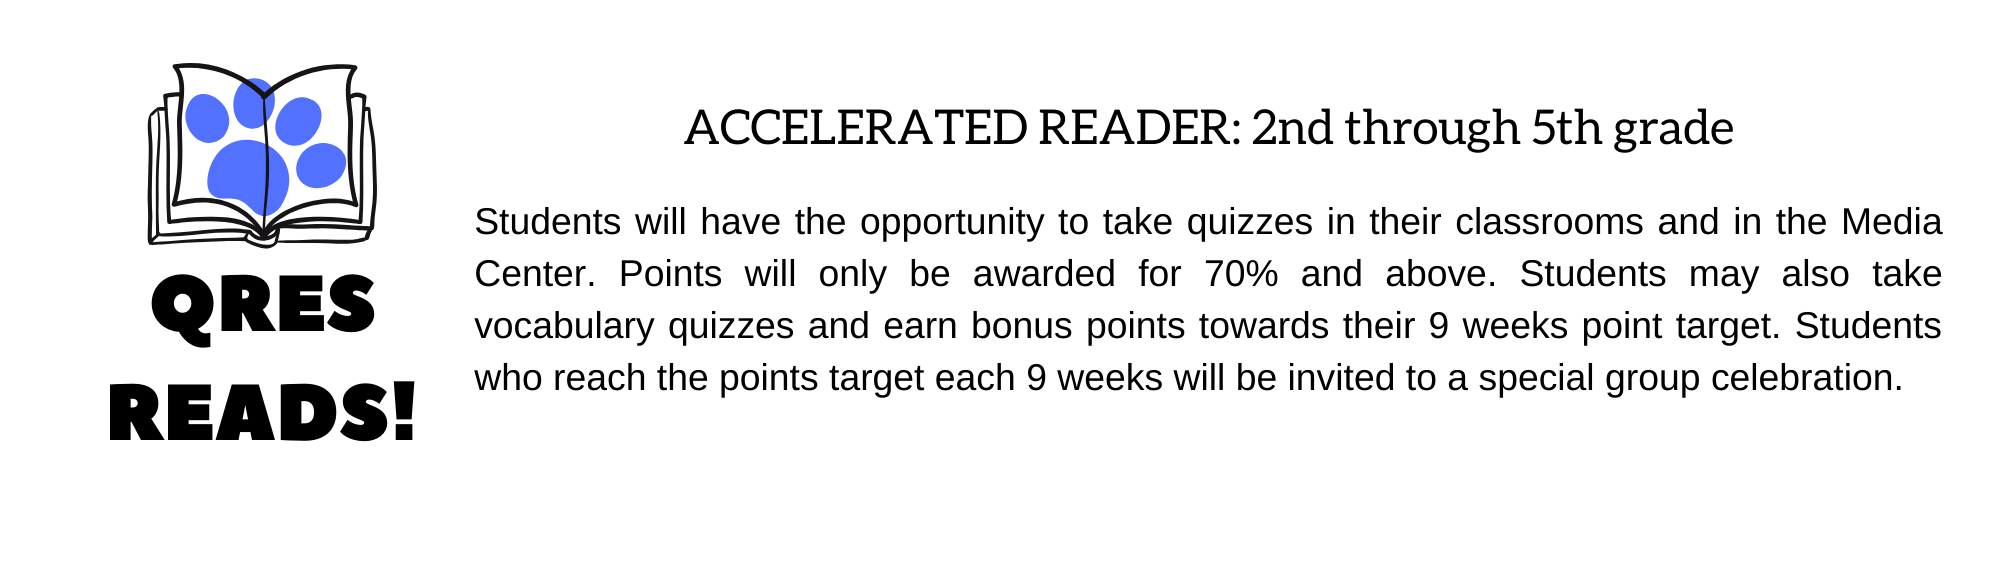 accelerated reader